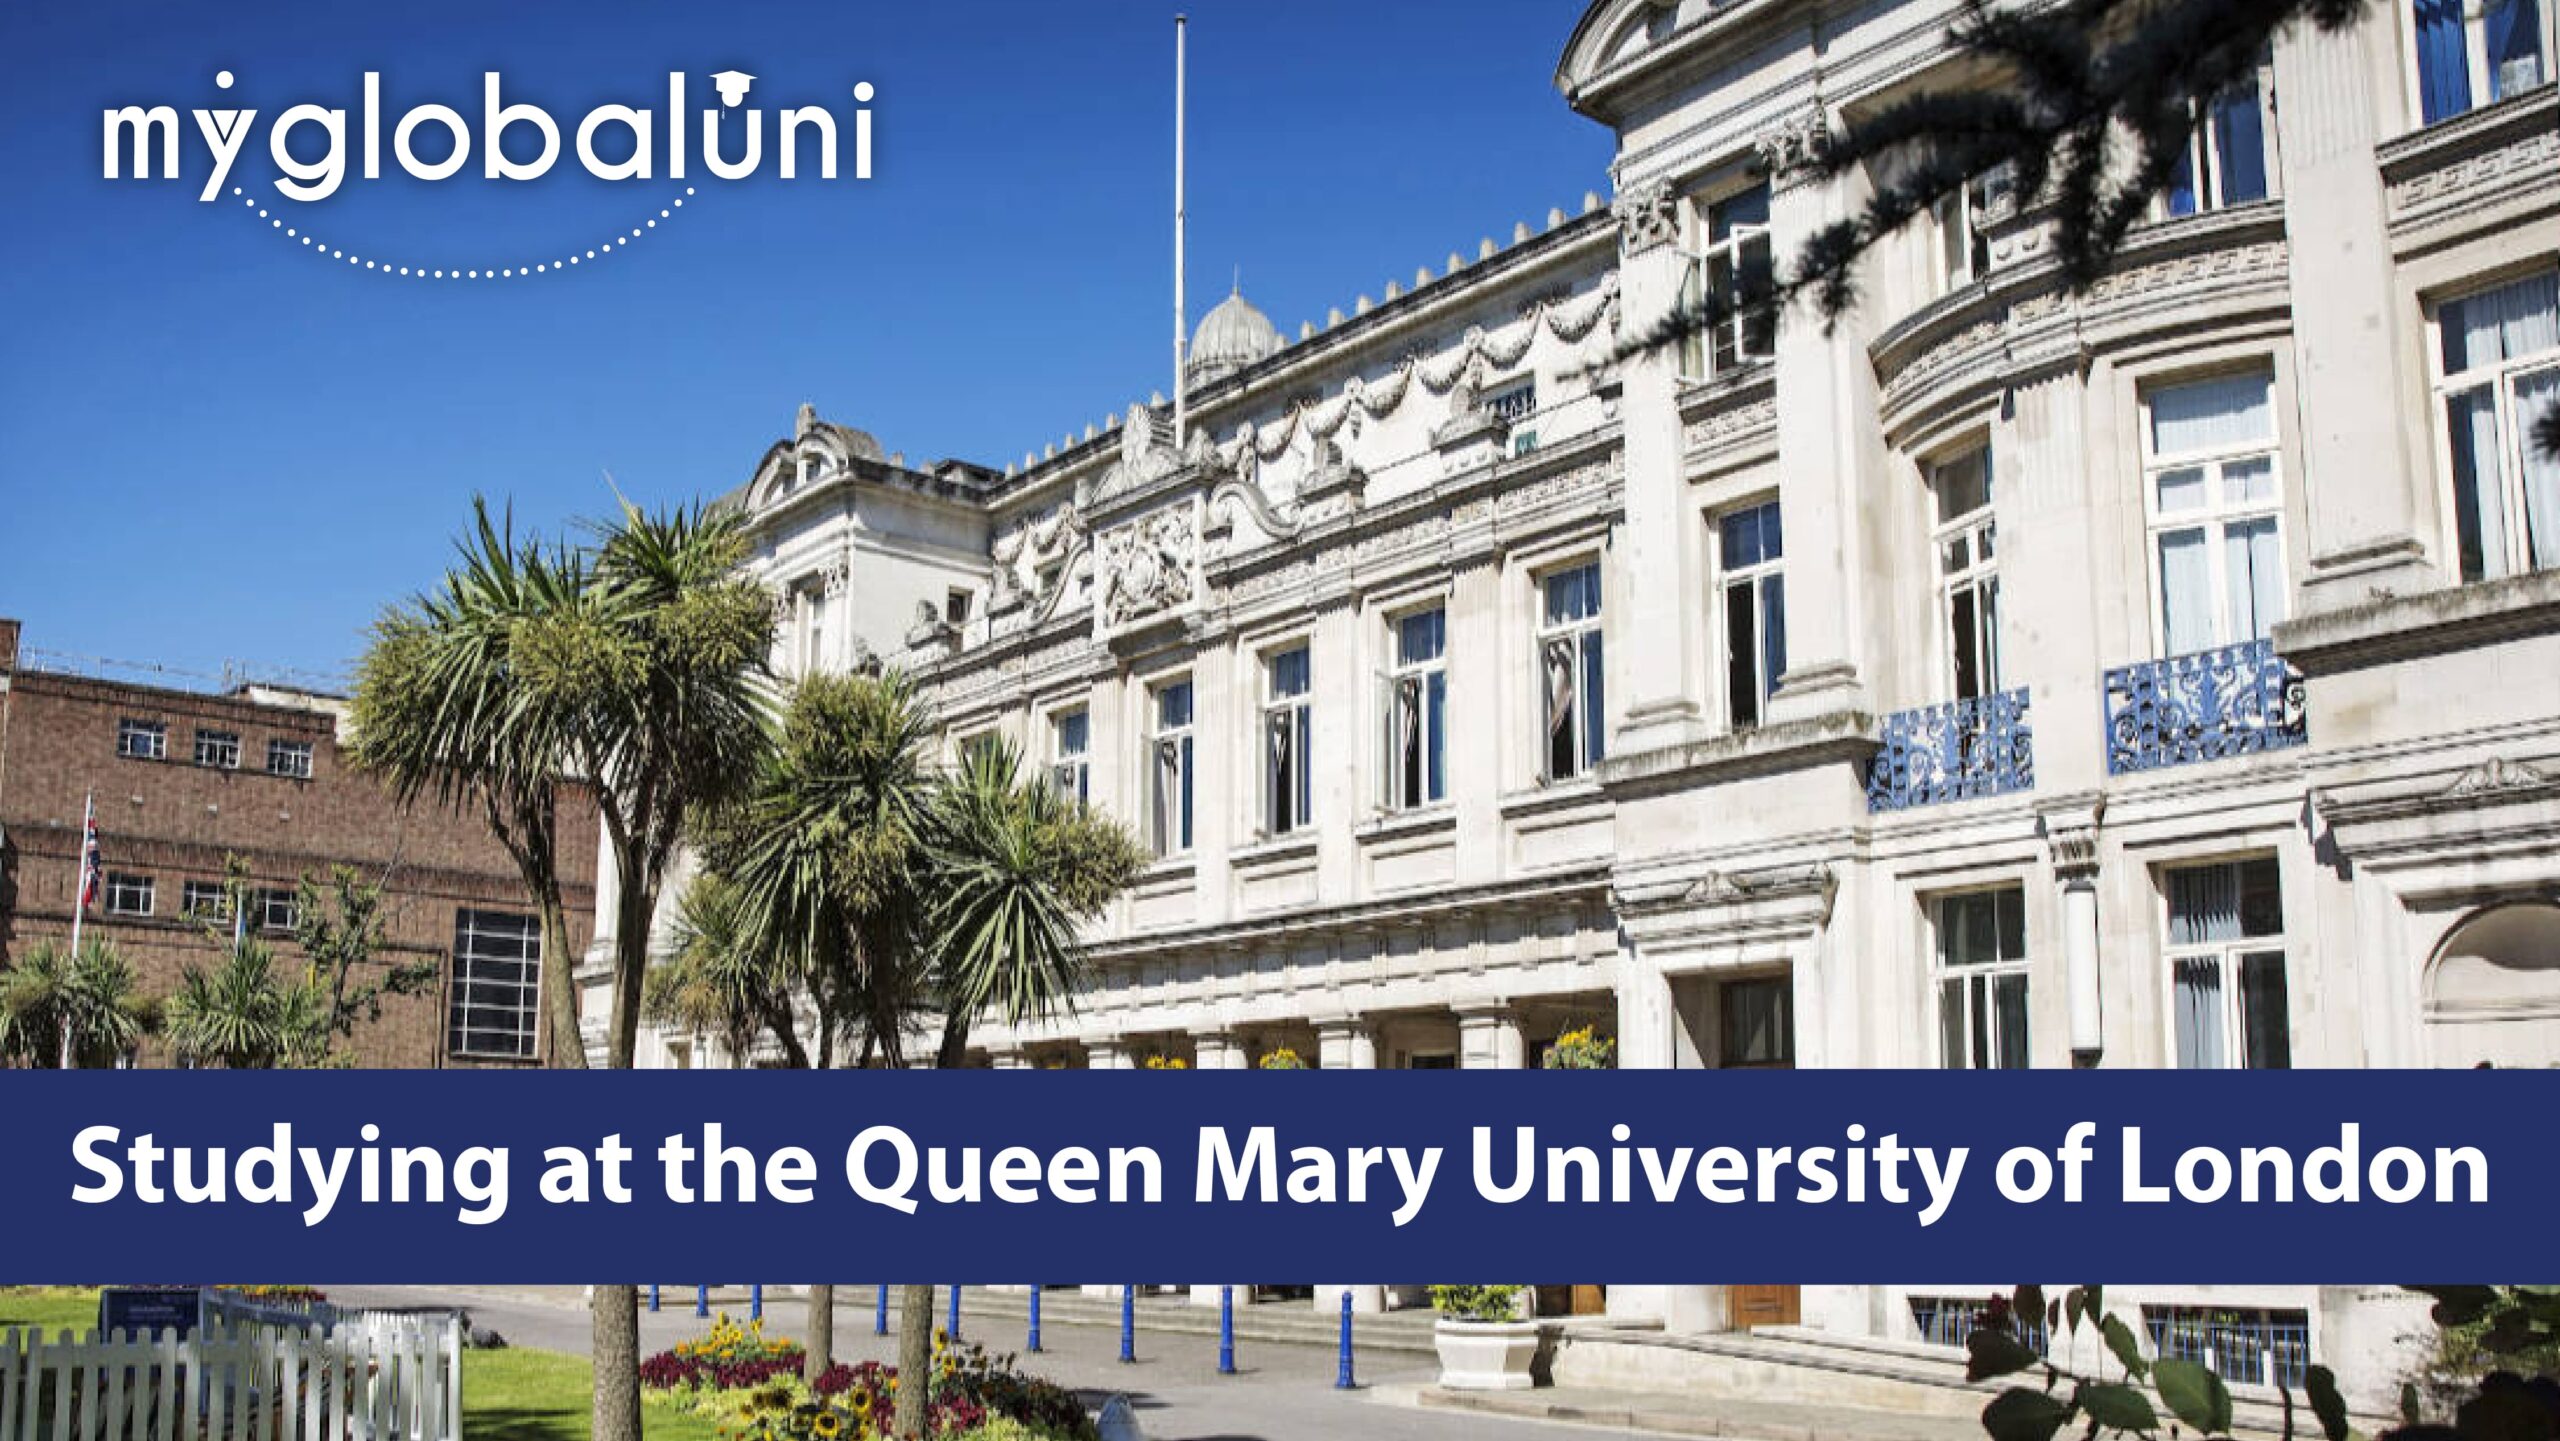 Studying at the Queen Mary University of London